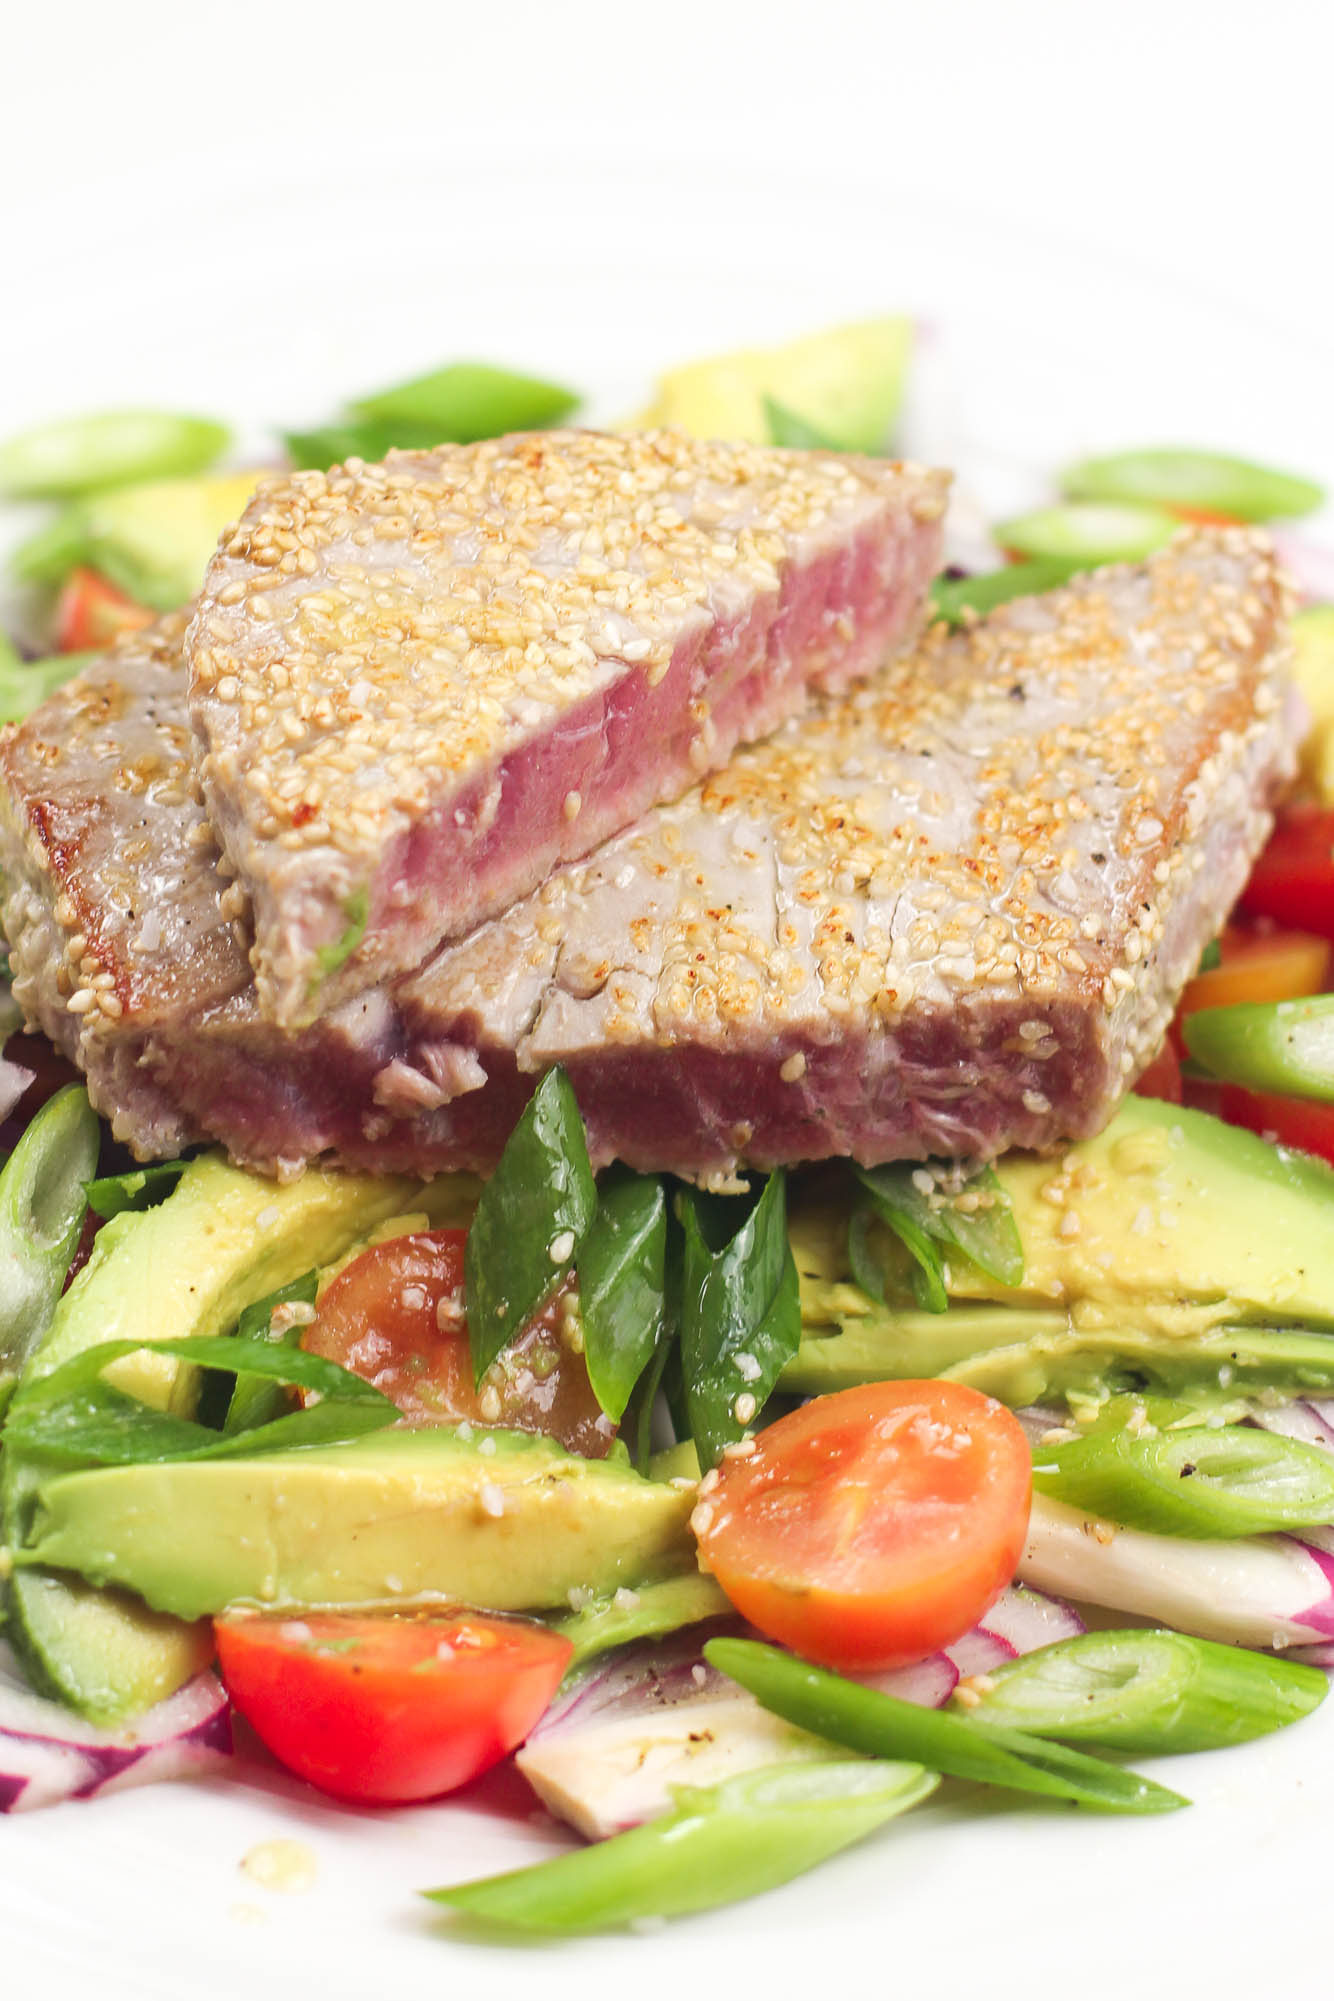 Ahi Tuna Salad on a plate with vegetables such as tomatoes green onion and avocado.